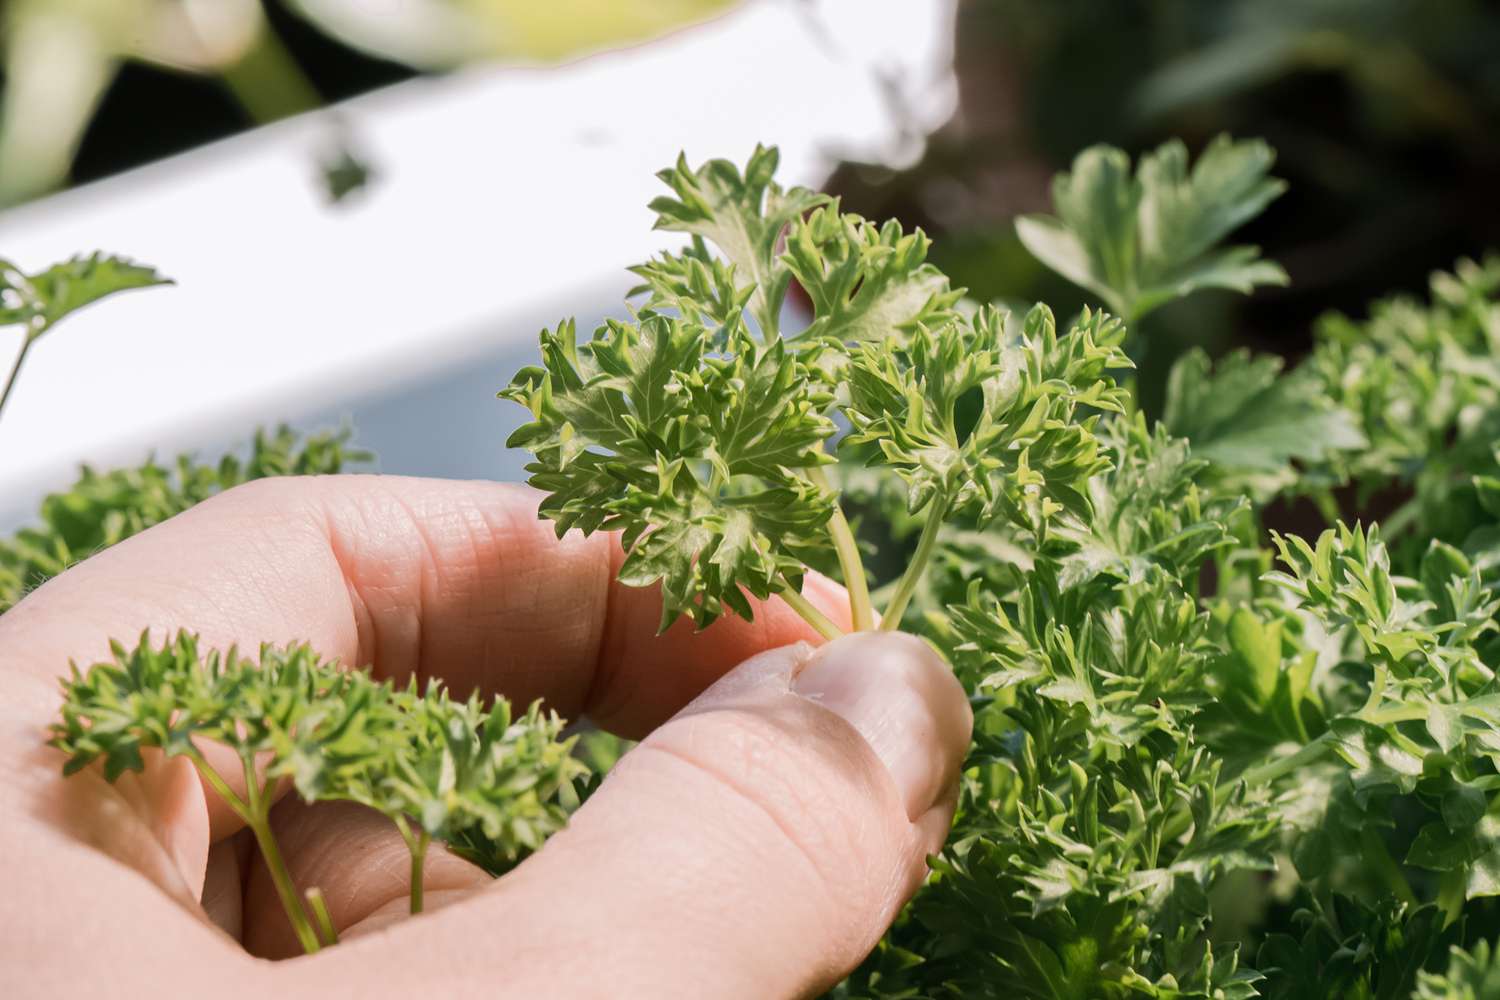 How To Harvest Parsley Without Killing The Plant